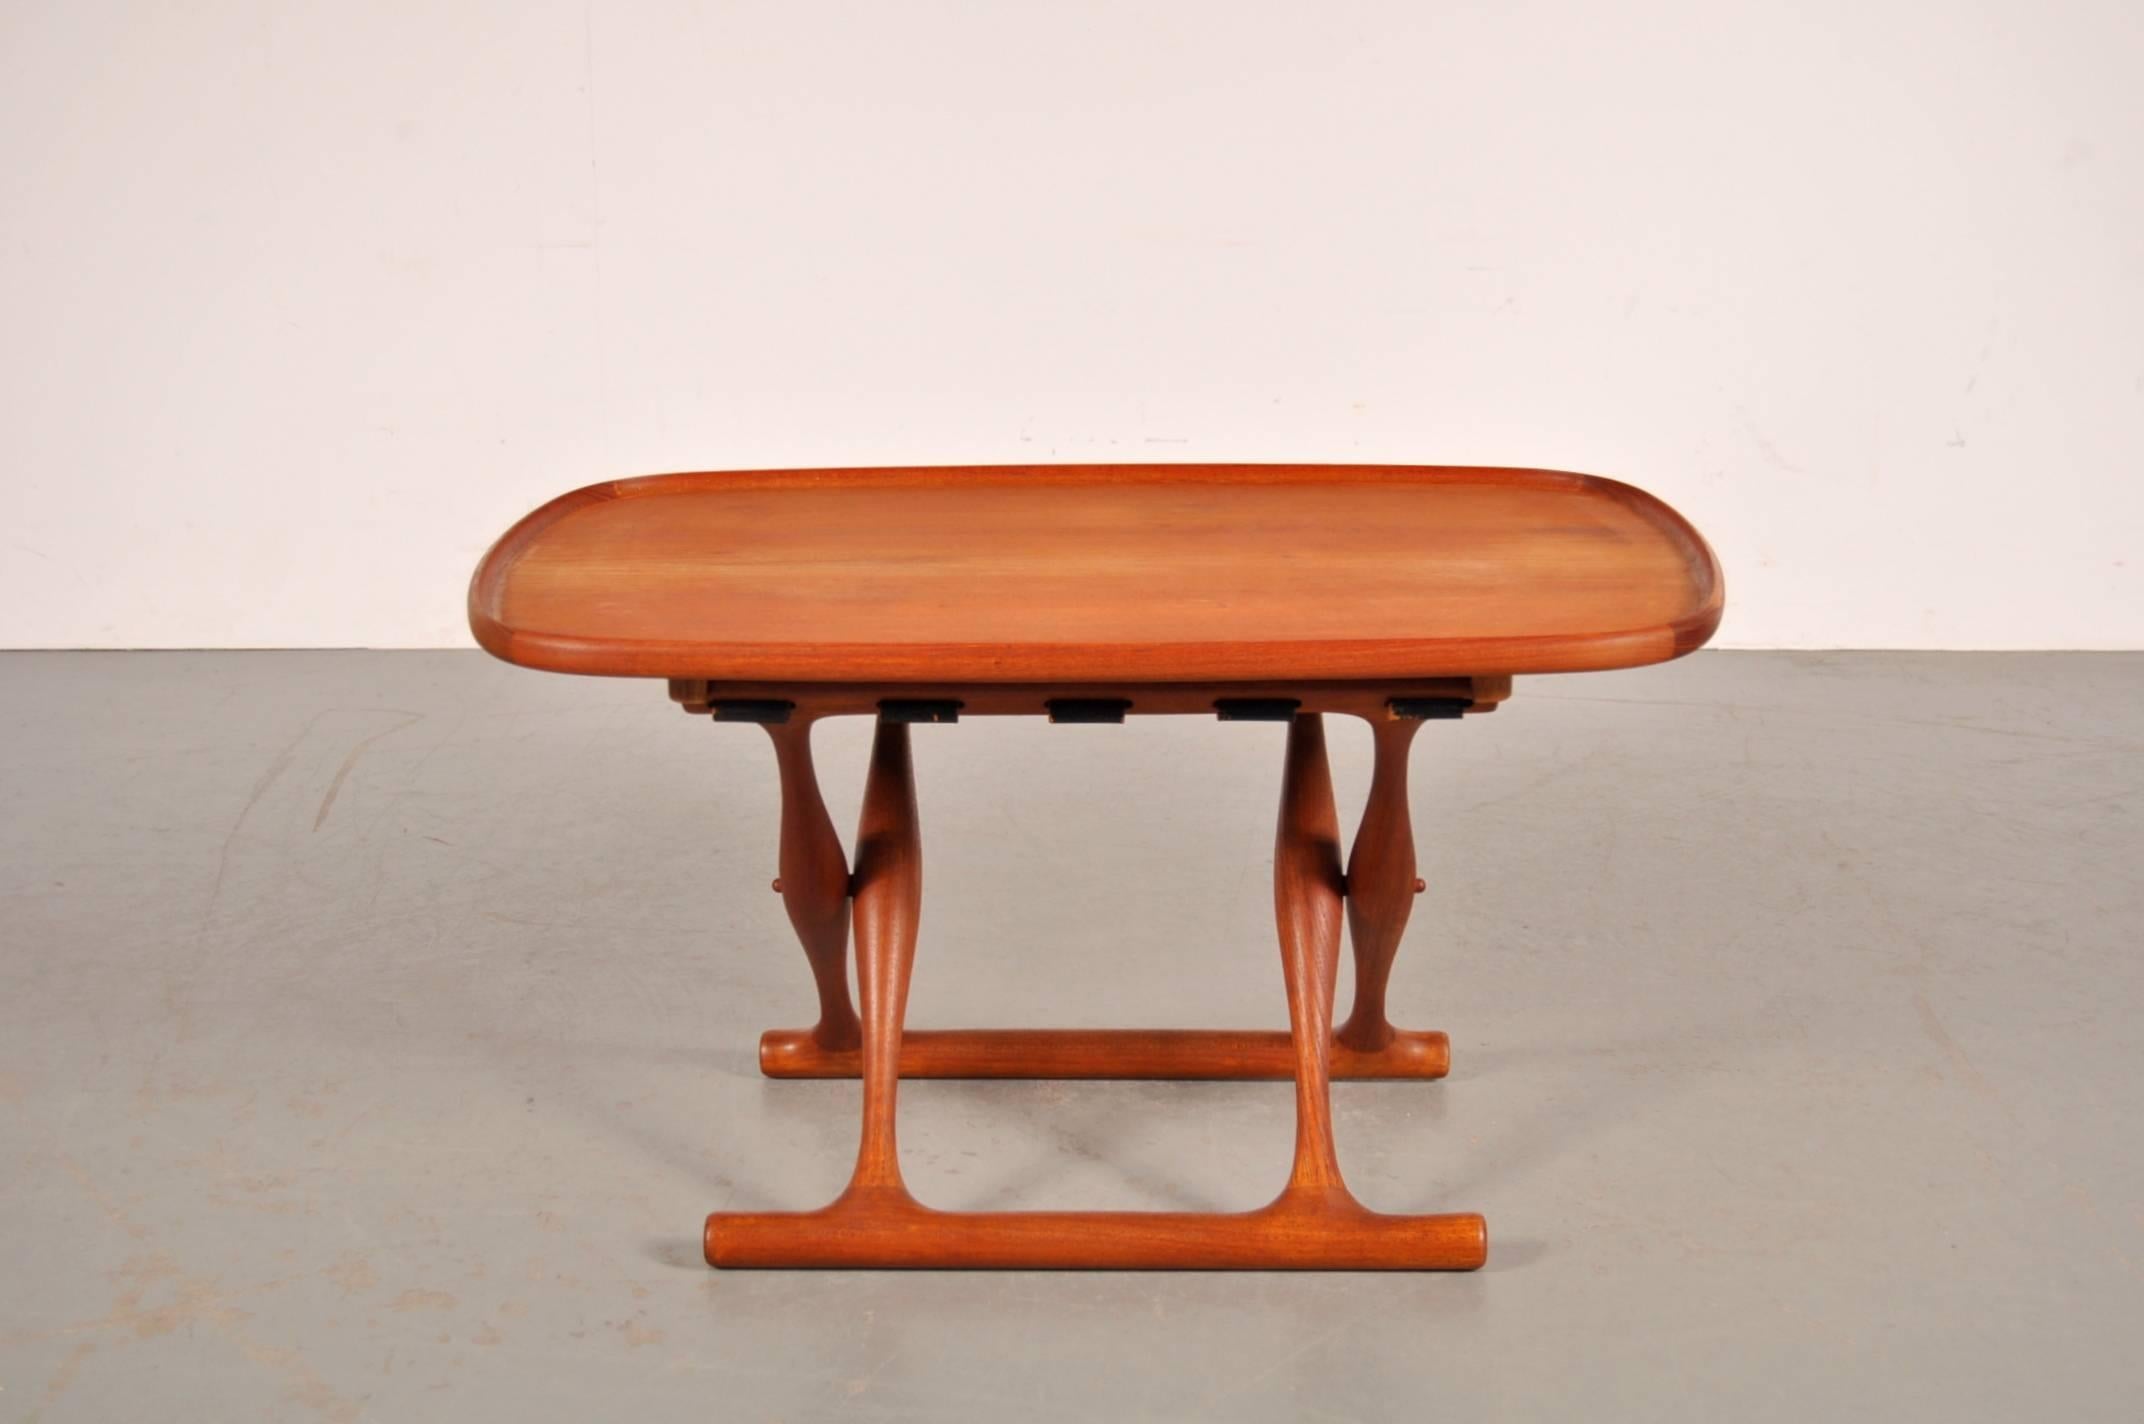 Danish Folding Stool with Tray by Poul Hundevad for Domus Danica, Denmark, circa 1950